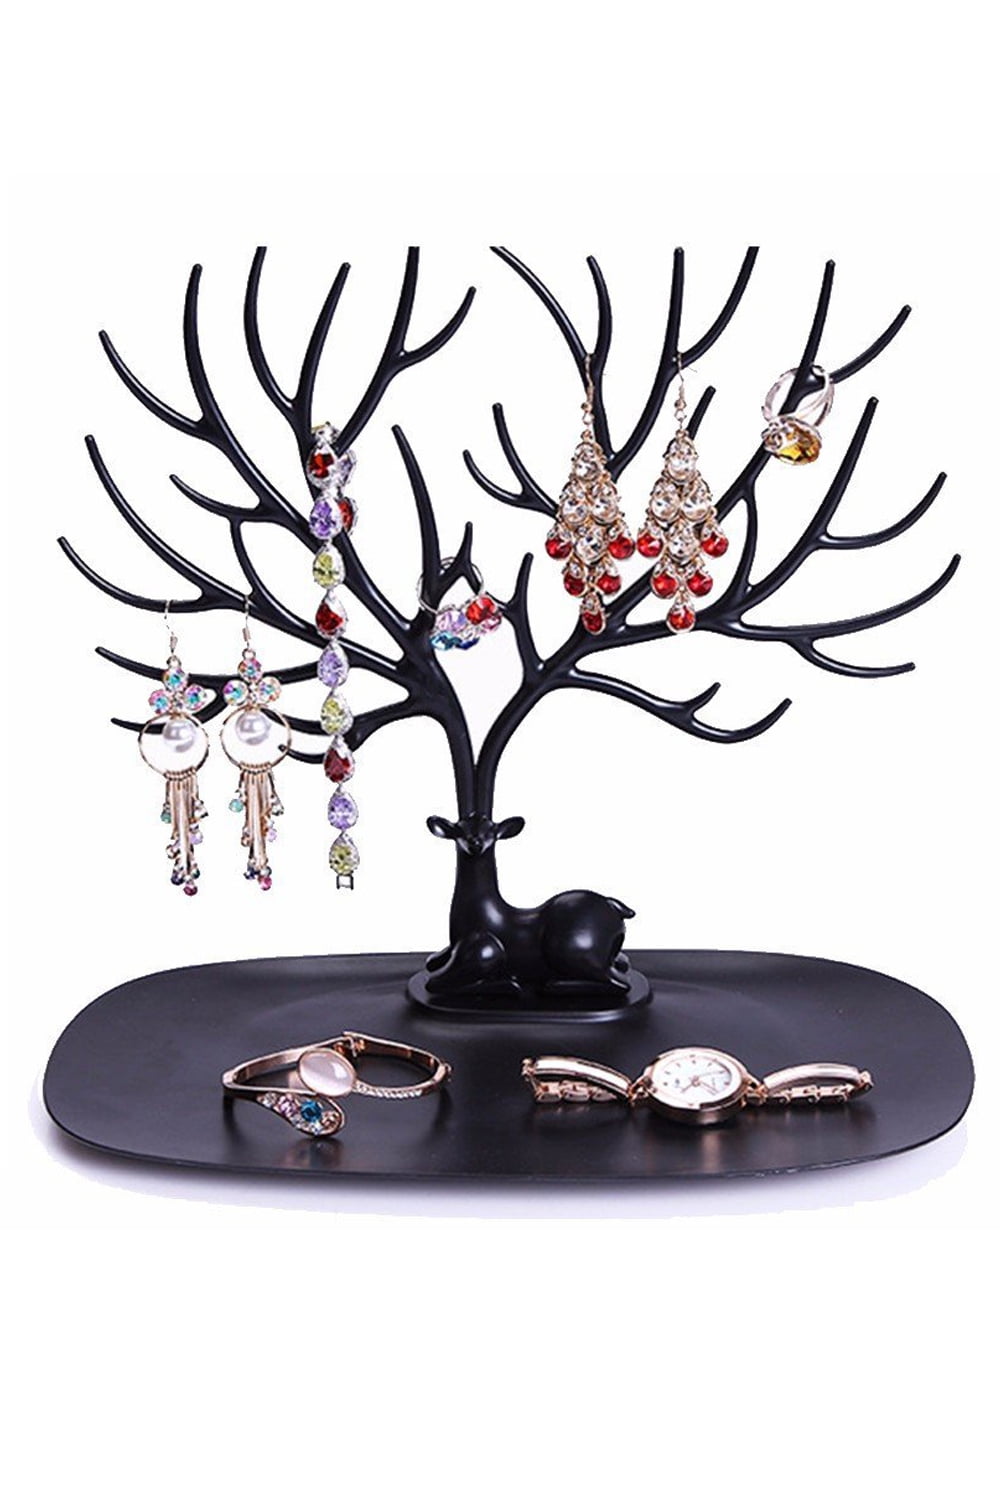 Tree Stand Jewelry Necklace Showing Display Rack For Earring Holder Ring Storage